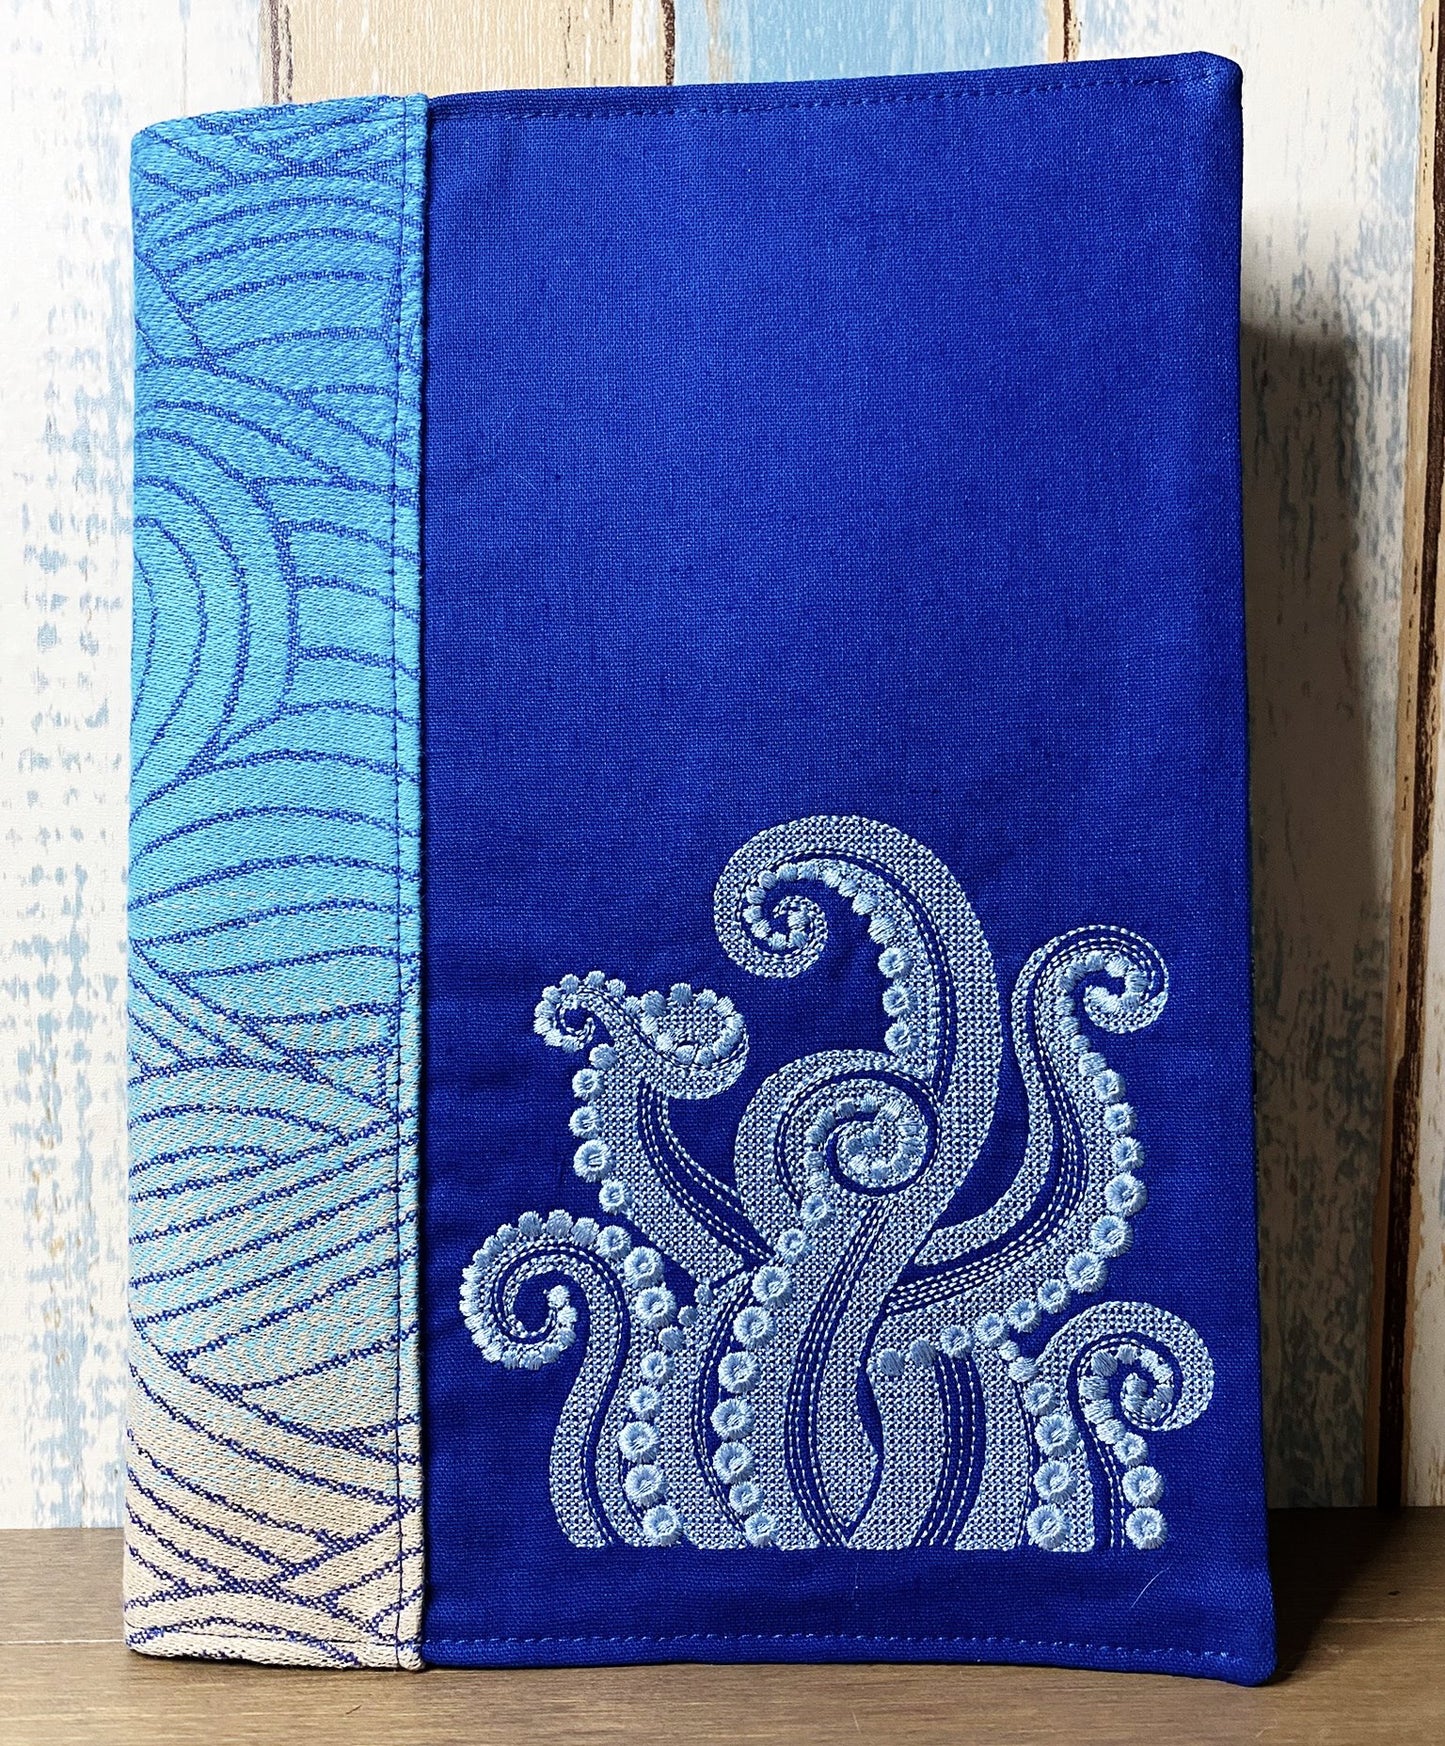 Opulent Octopus Journal and Notebook Cover